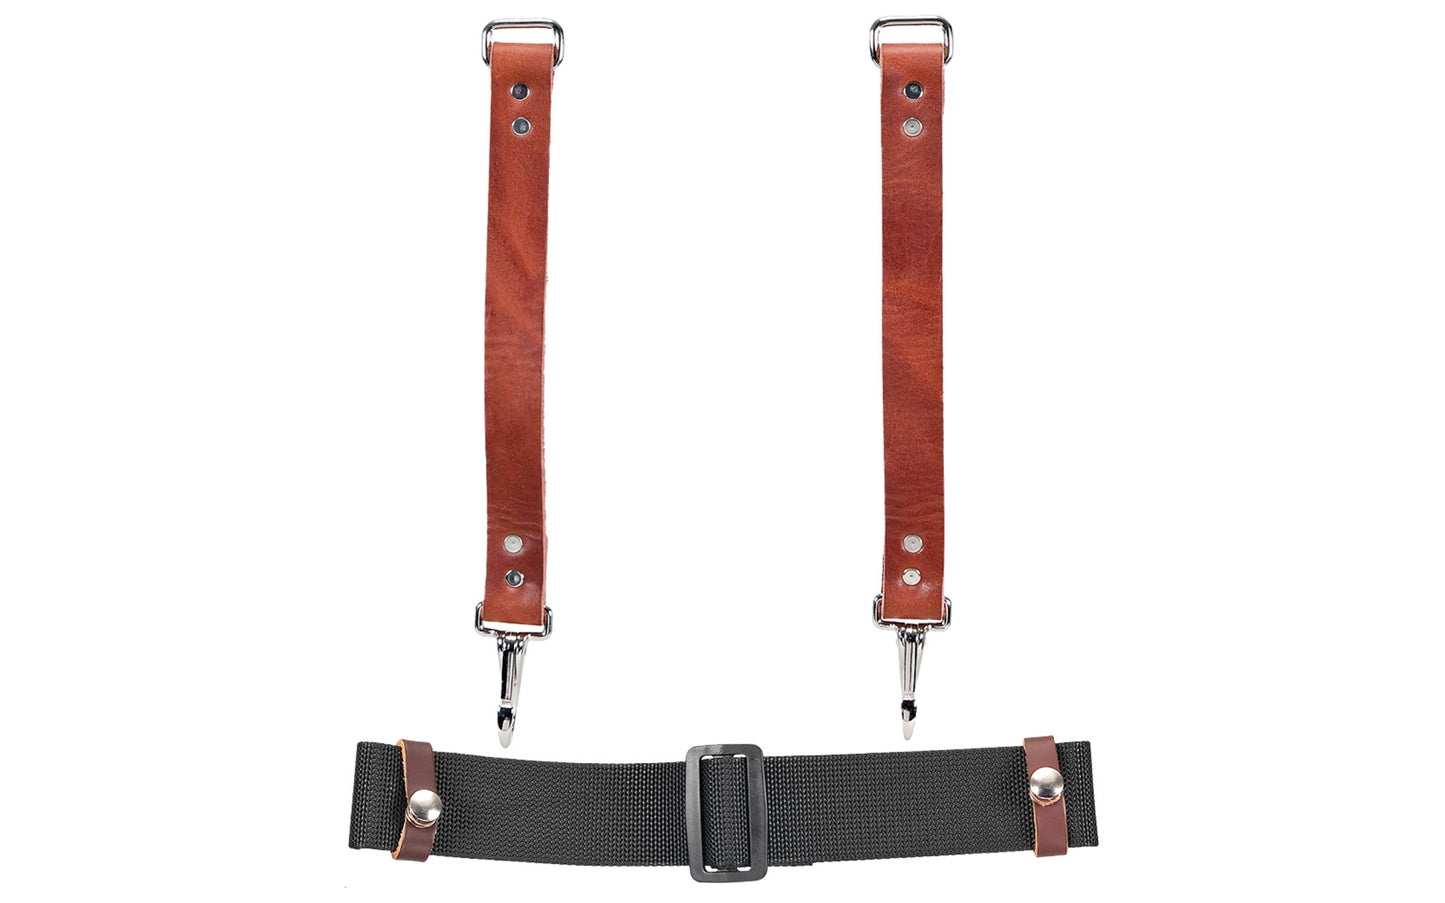 Occidental Leather Beltless extension kit is designed for the "Stronghold" Beltless 6-Bag Framer. Straps add 10” to total length of suspenders & backstrap adds up an extra 6” between bags in back. Industrial nylon material & genuine leather. Easy On & Off beltless tool bag system. Model No. 5045. 759244173505